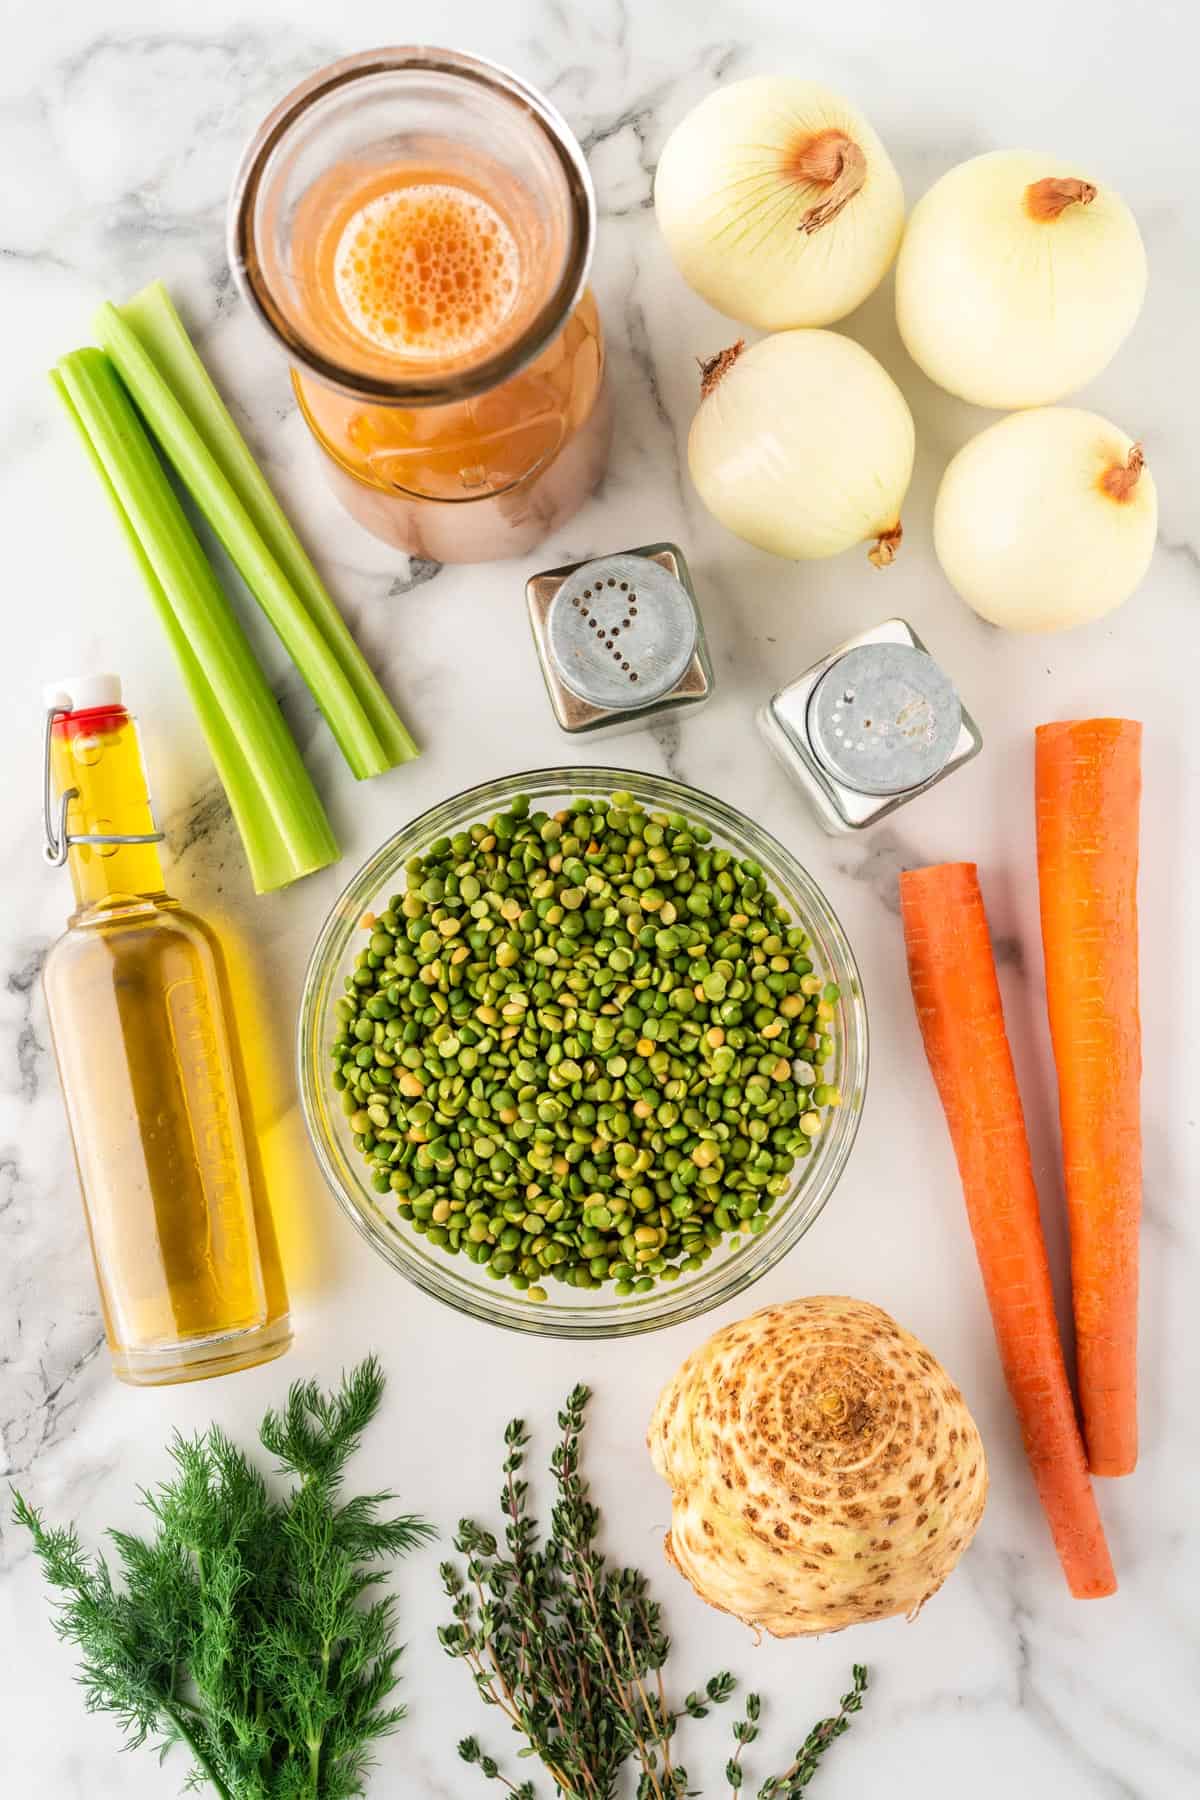 A photo of the ingredients needed to make vegetarian split pea soup.